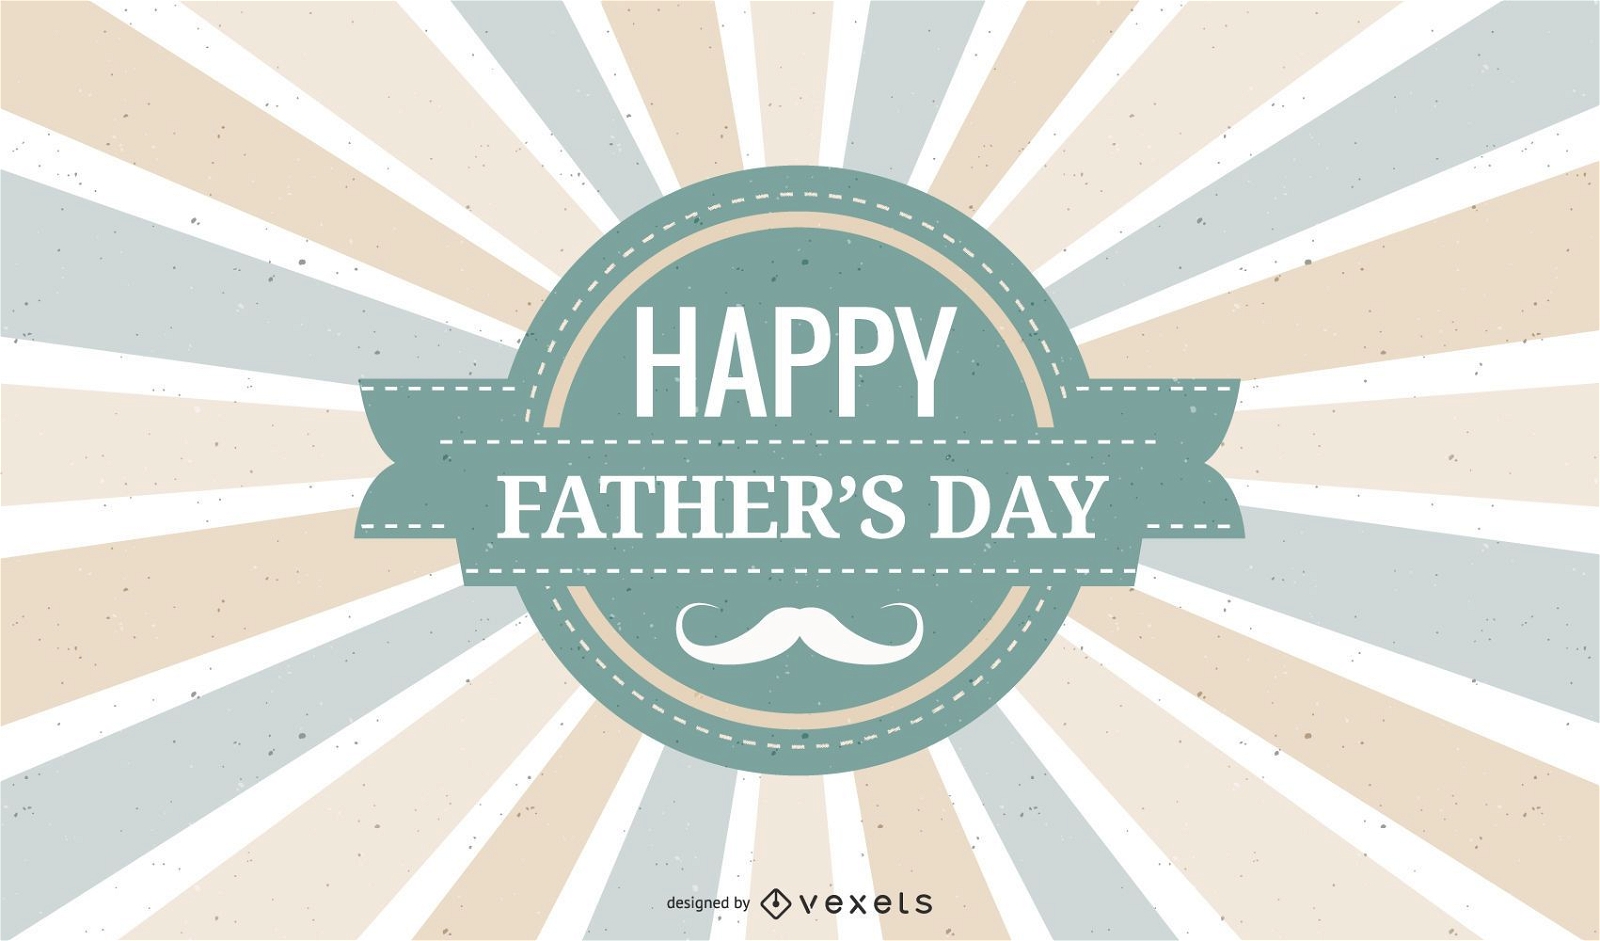 Vintage Father?s Day Greeting Card